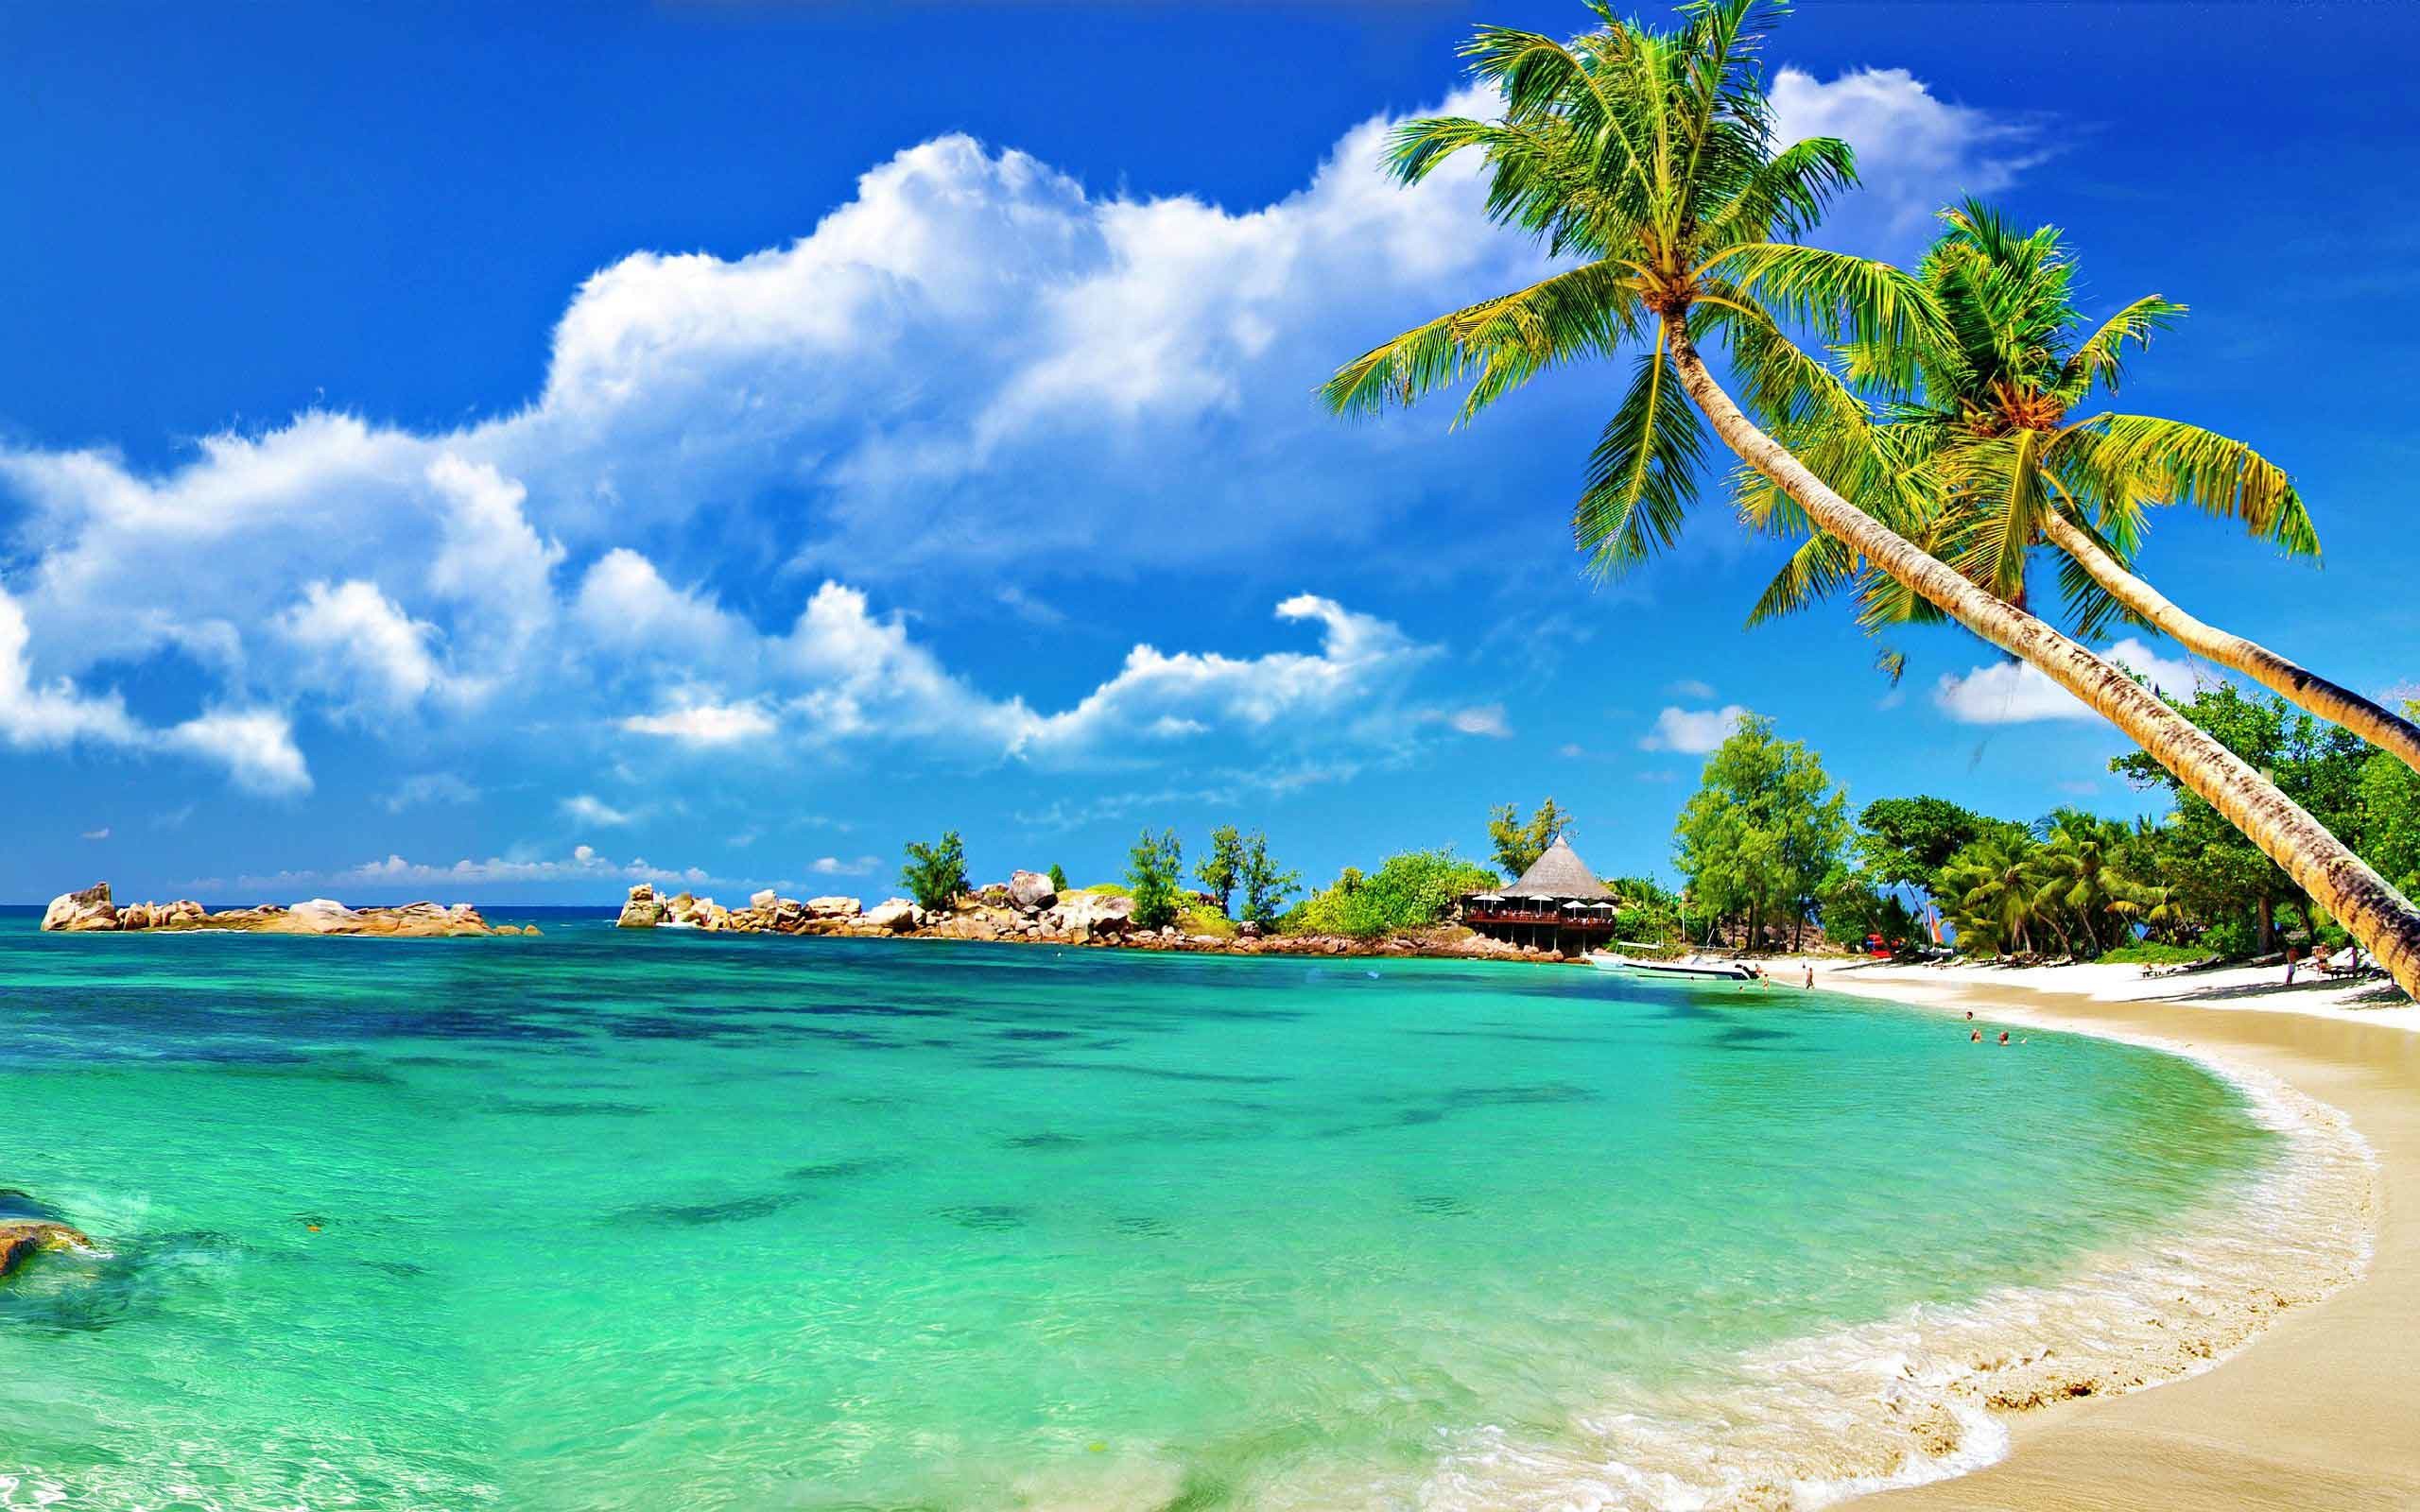 2560x1600 most-beautiful -nature-tropical-beach-widescreen-high-definition-wallpaper-for-desktop- background-download-beach-images-free